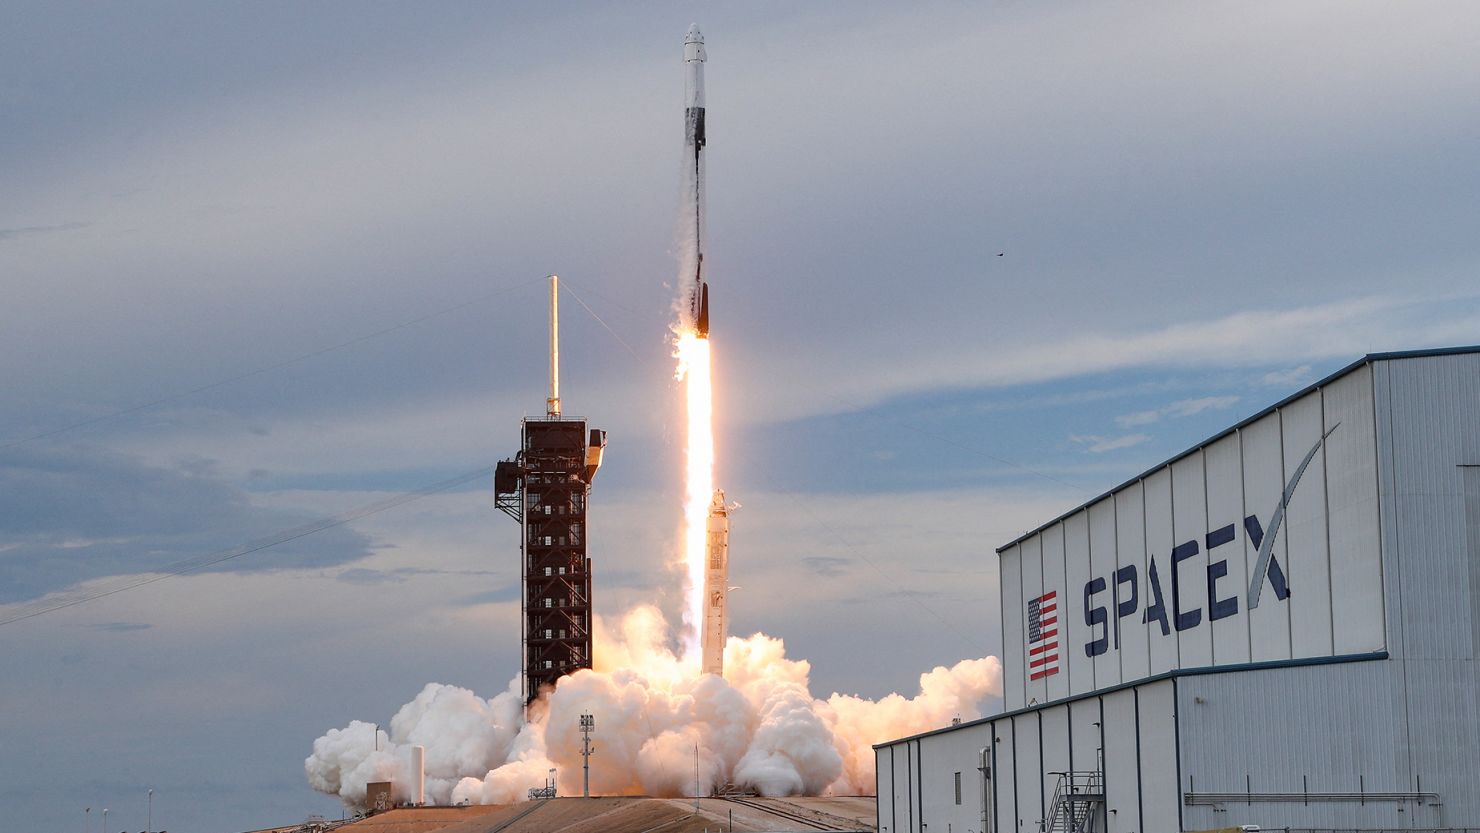 How To Watch Spacex Launch Today